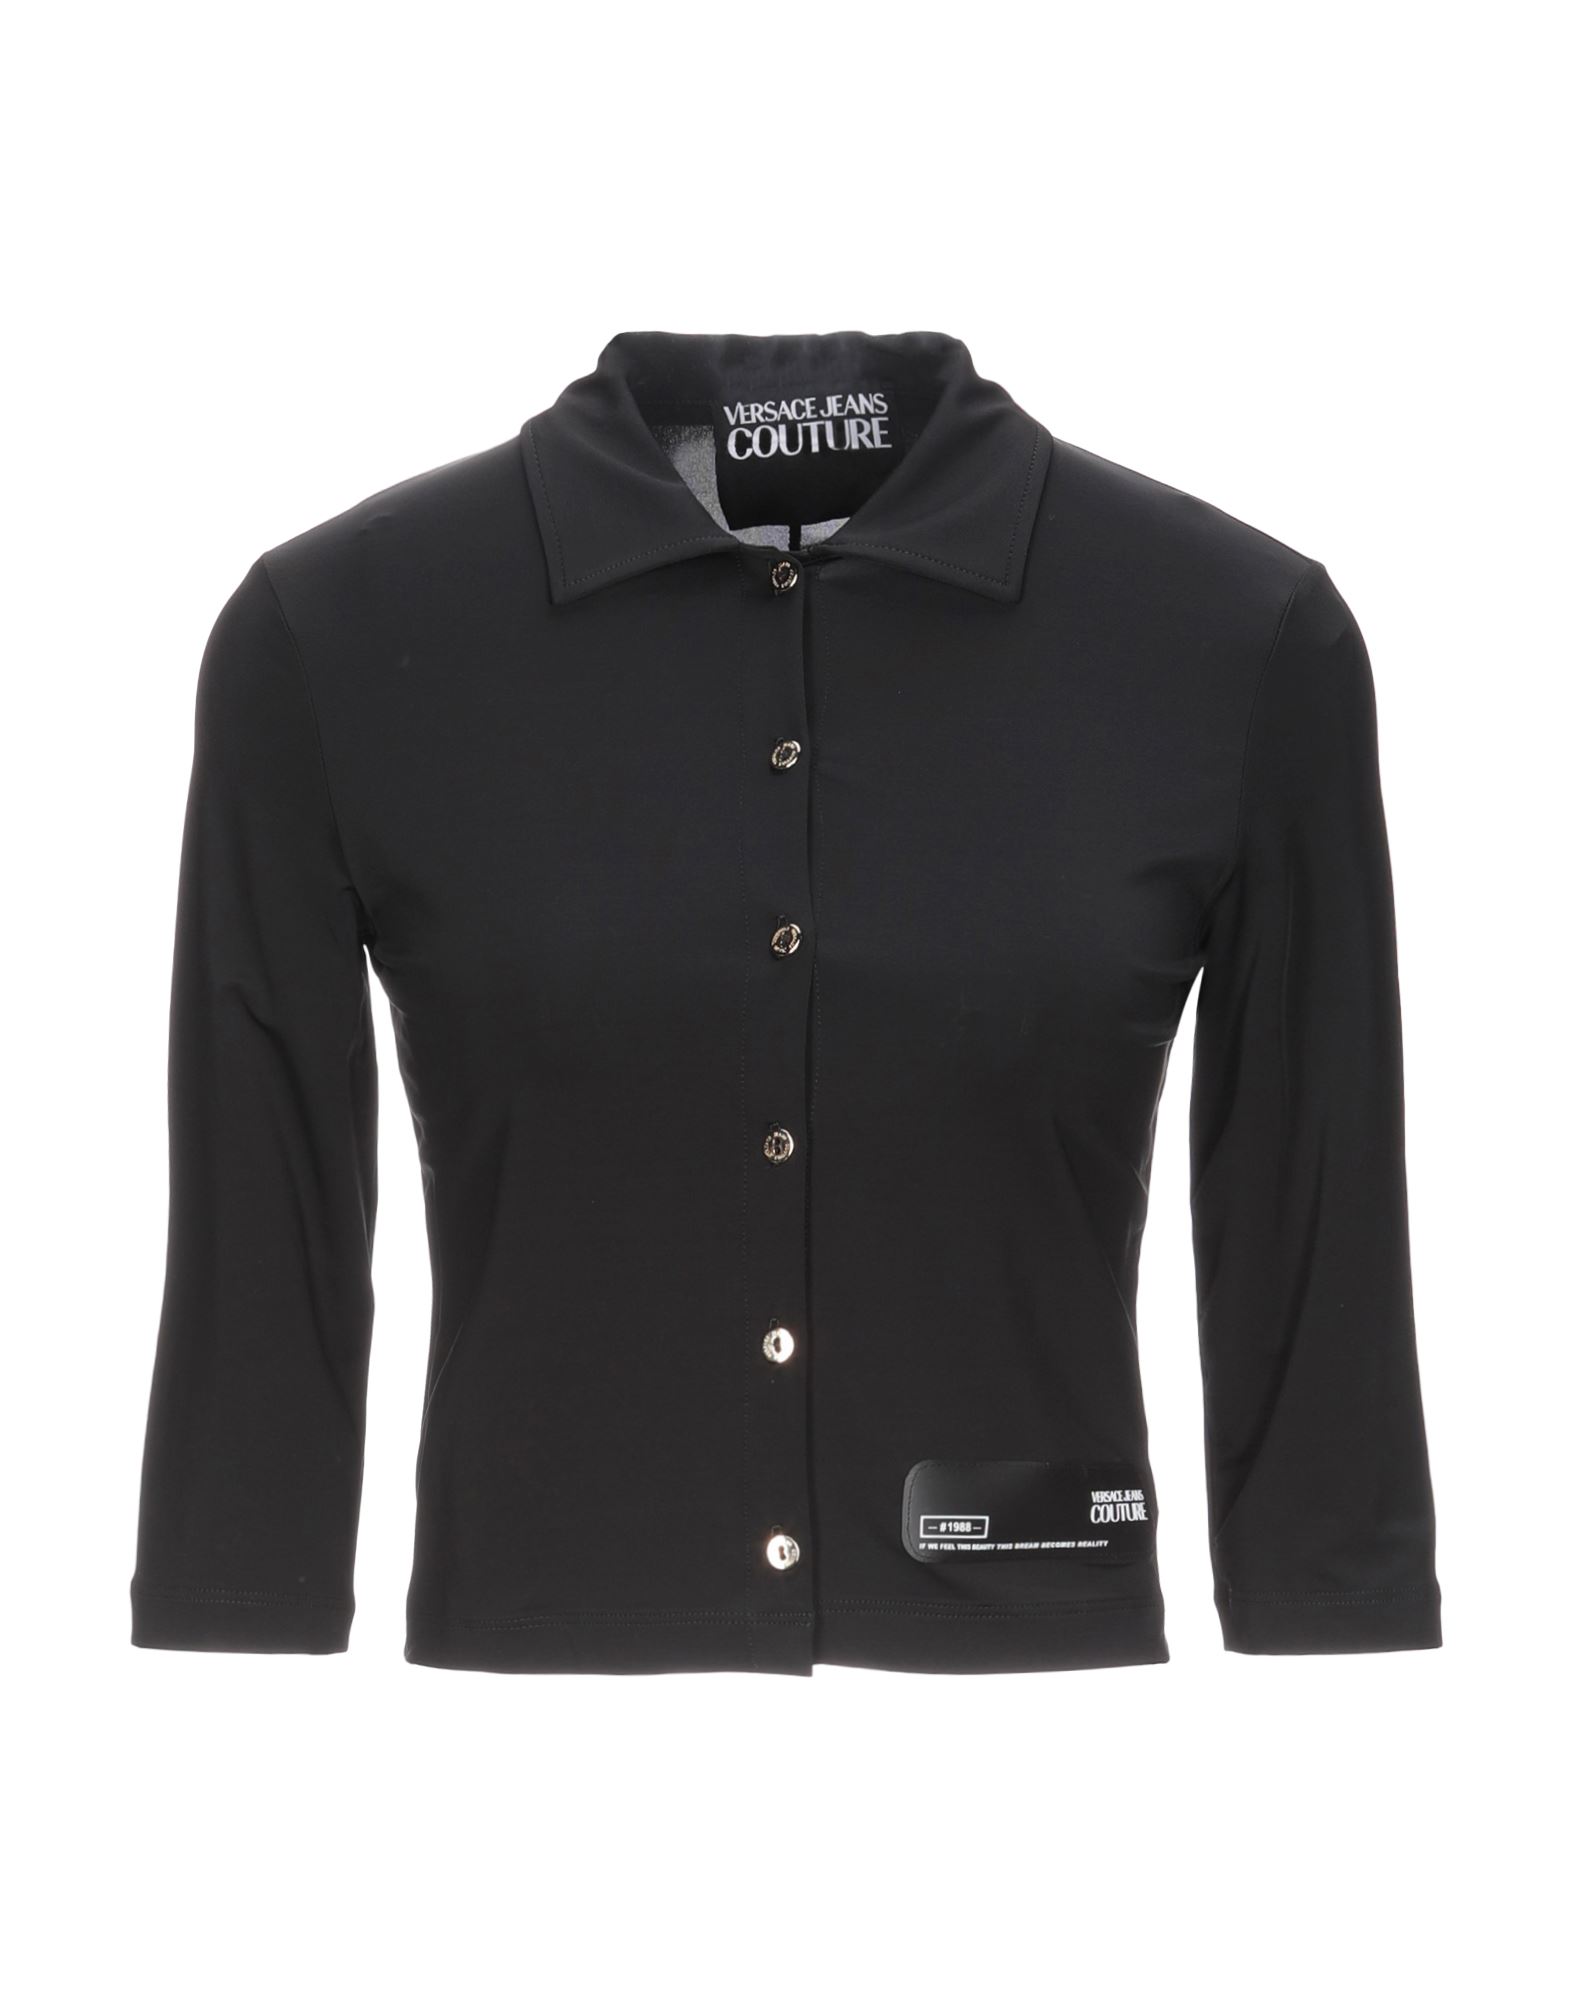 VERSACE JEANS COUTURE Shirts - Item 38947795